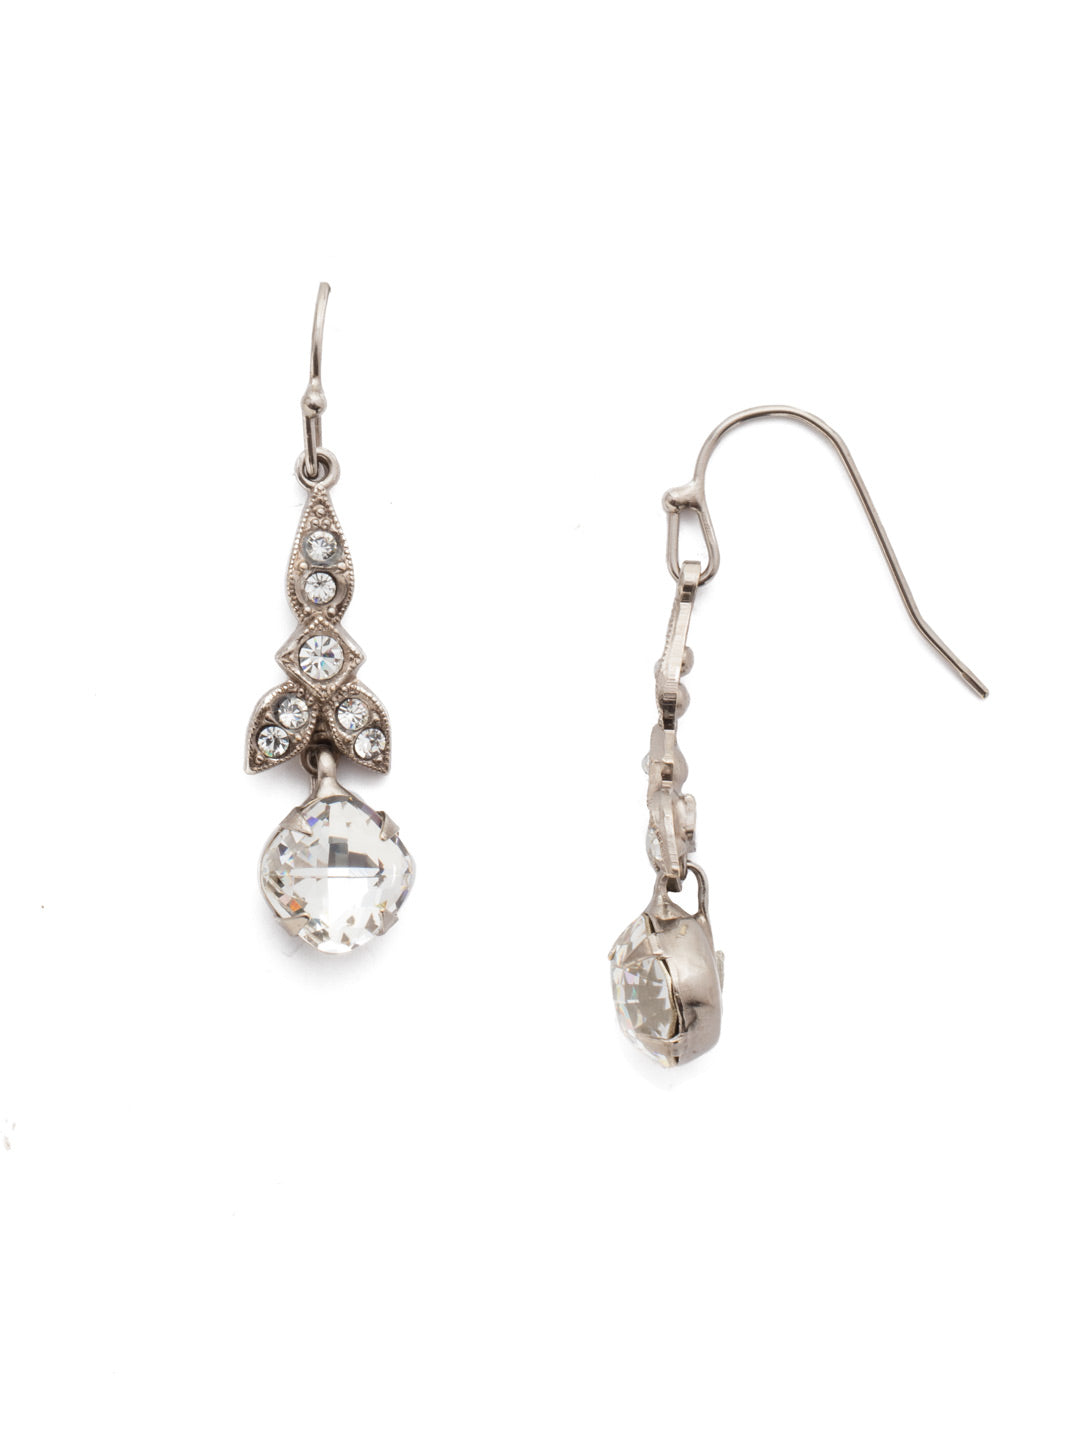 Product Image: Decidedly Deco Dangle Earrings